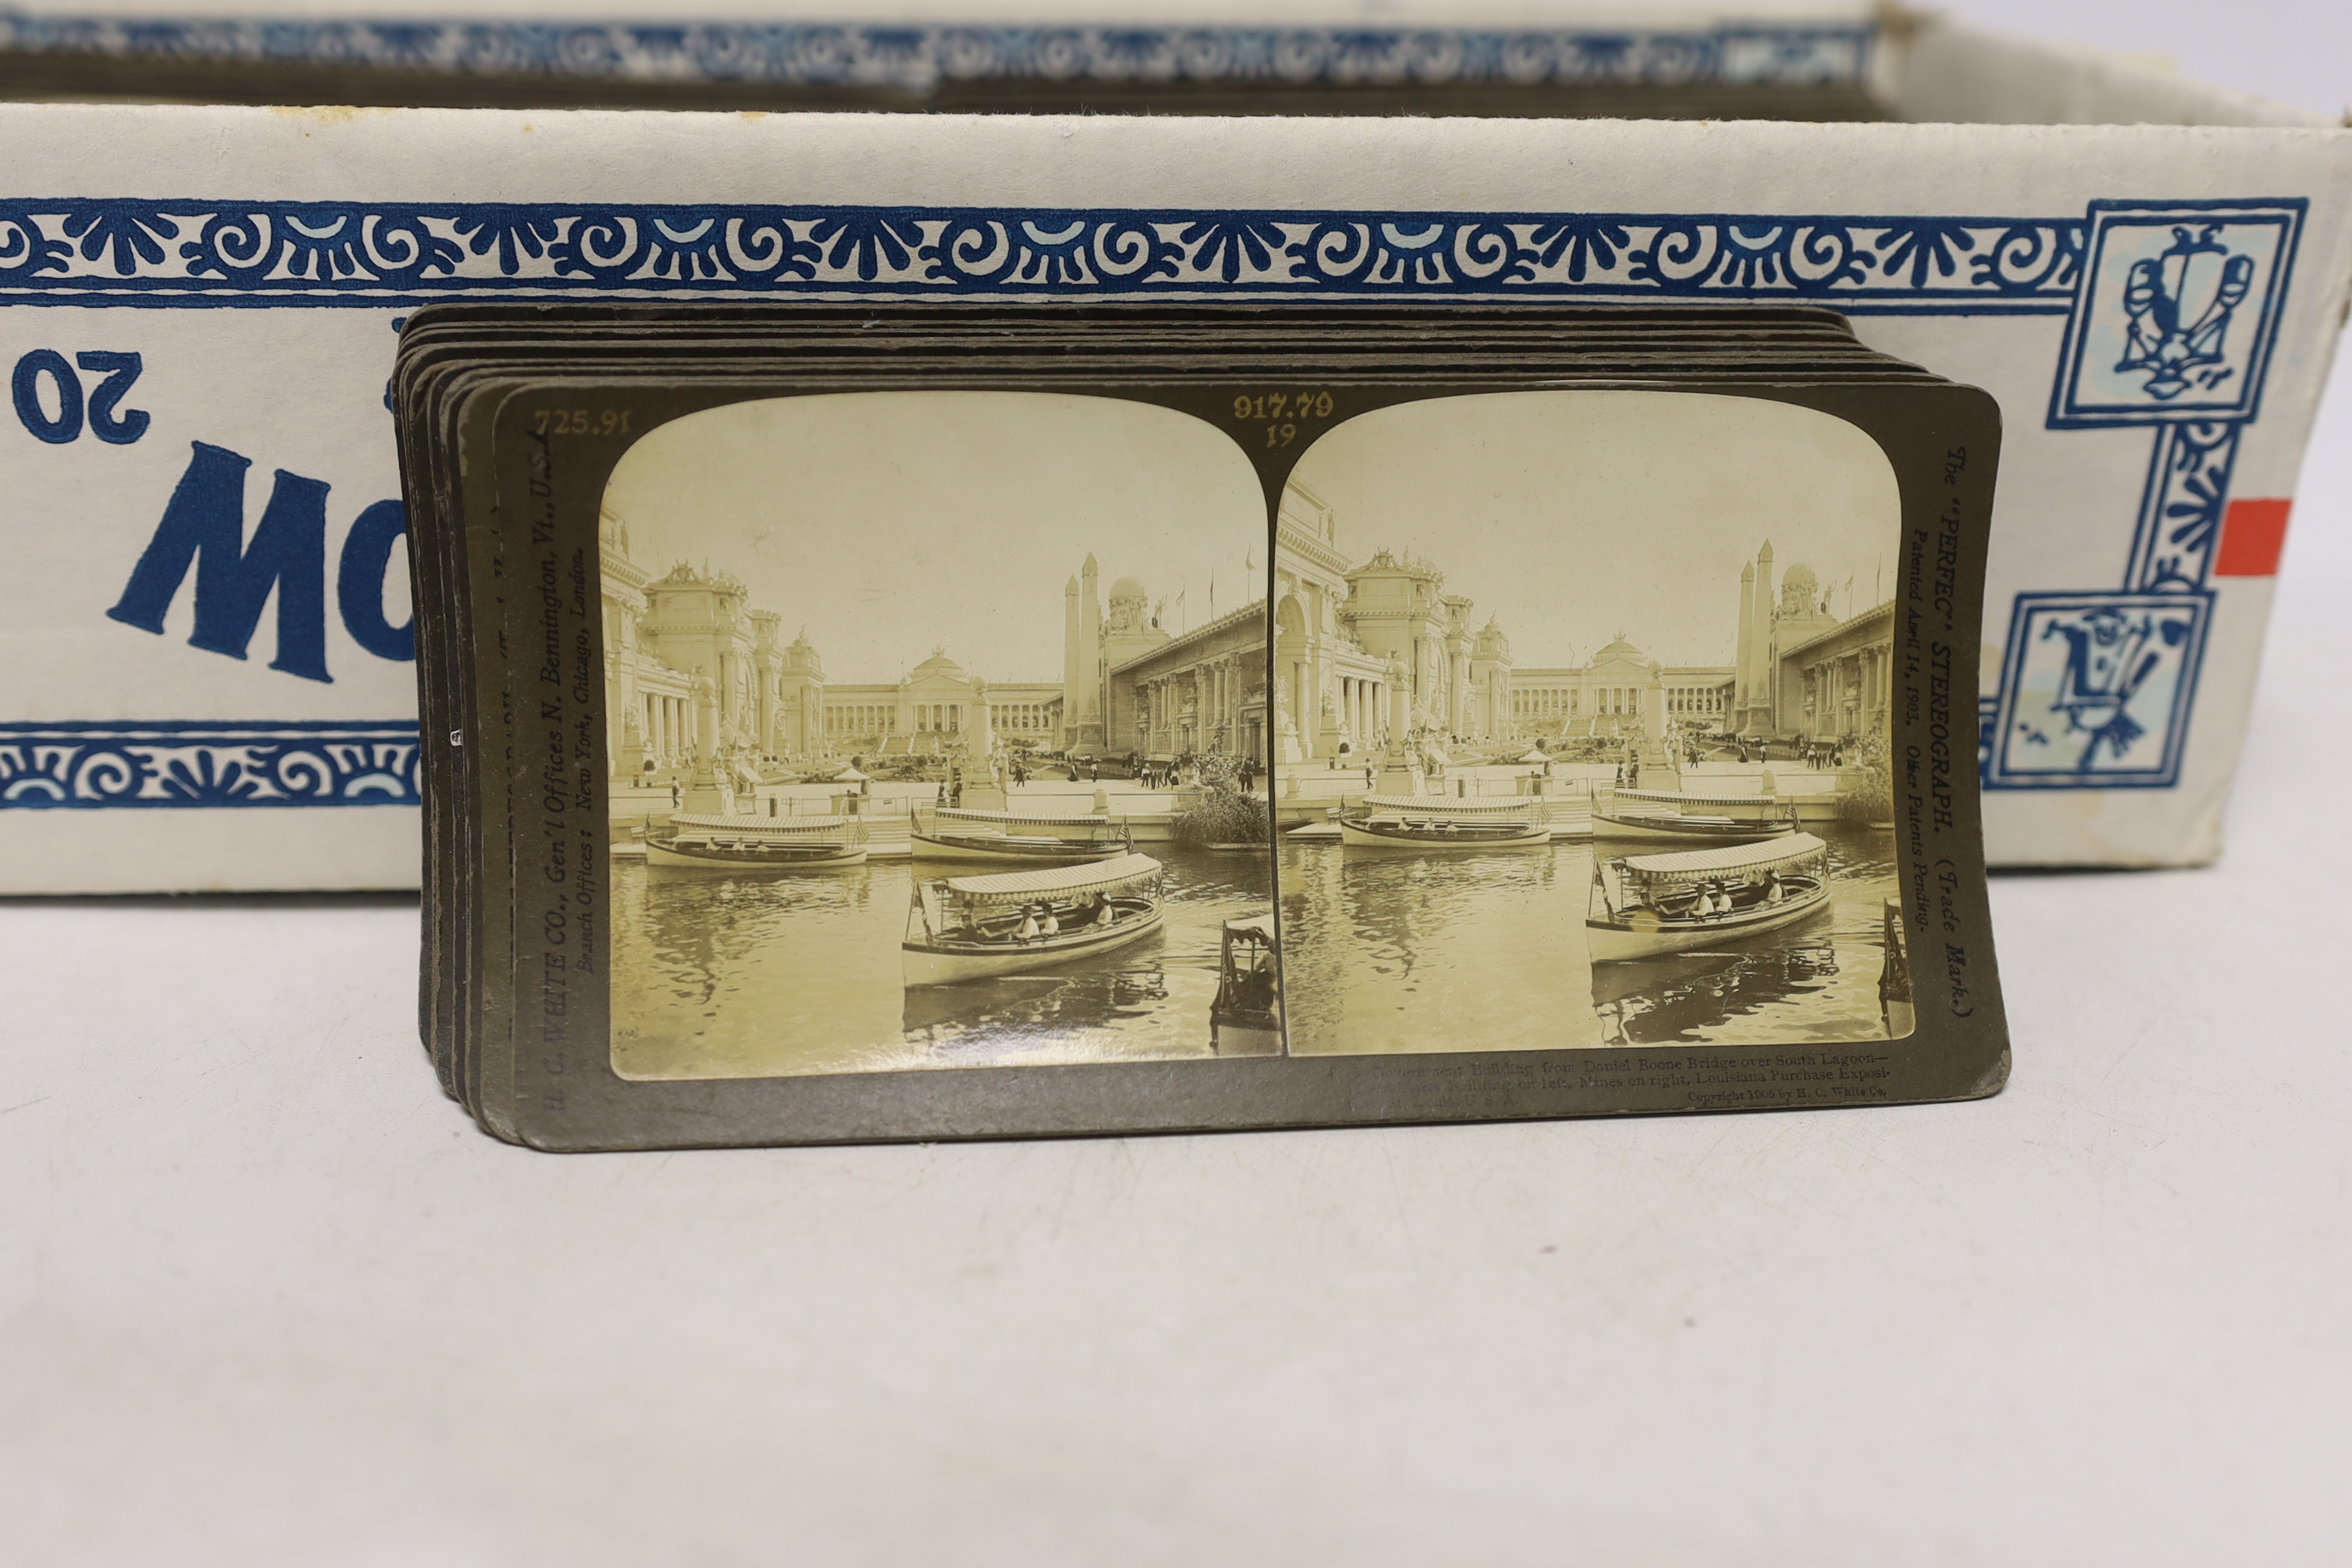 A Stereoscope viewer and slides, mostly topographical including Middle Eastern scenes - Image 2 of 5